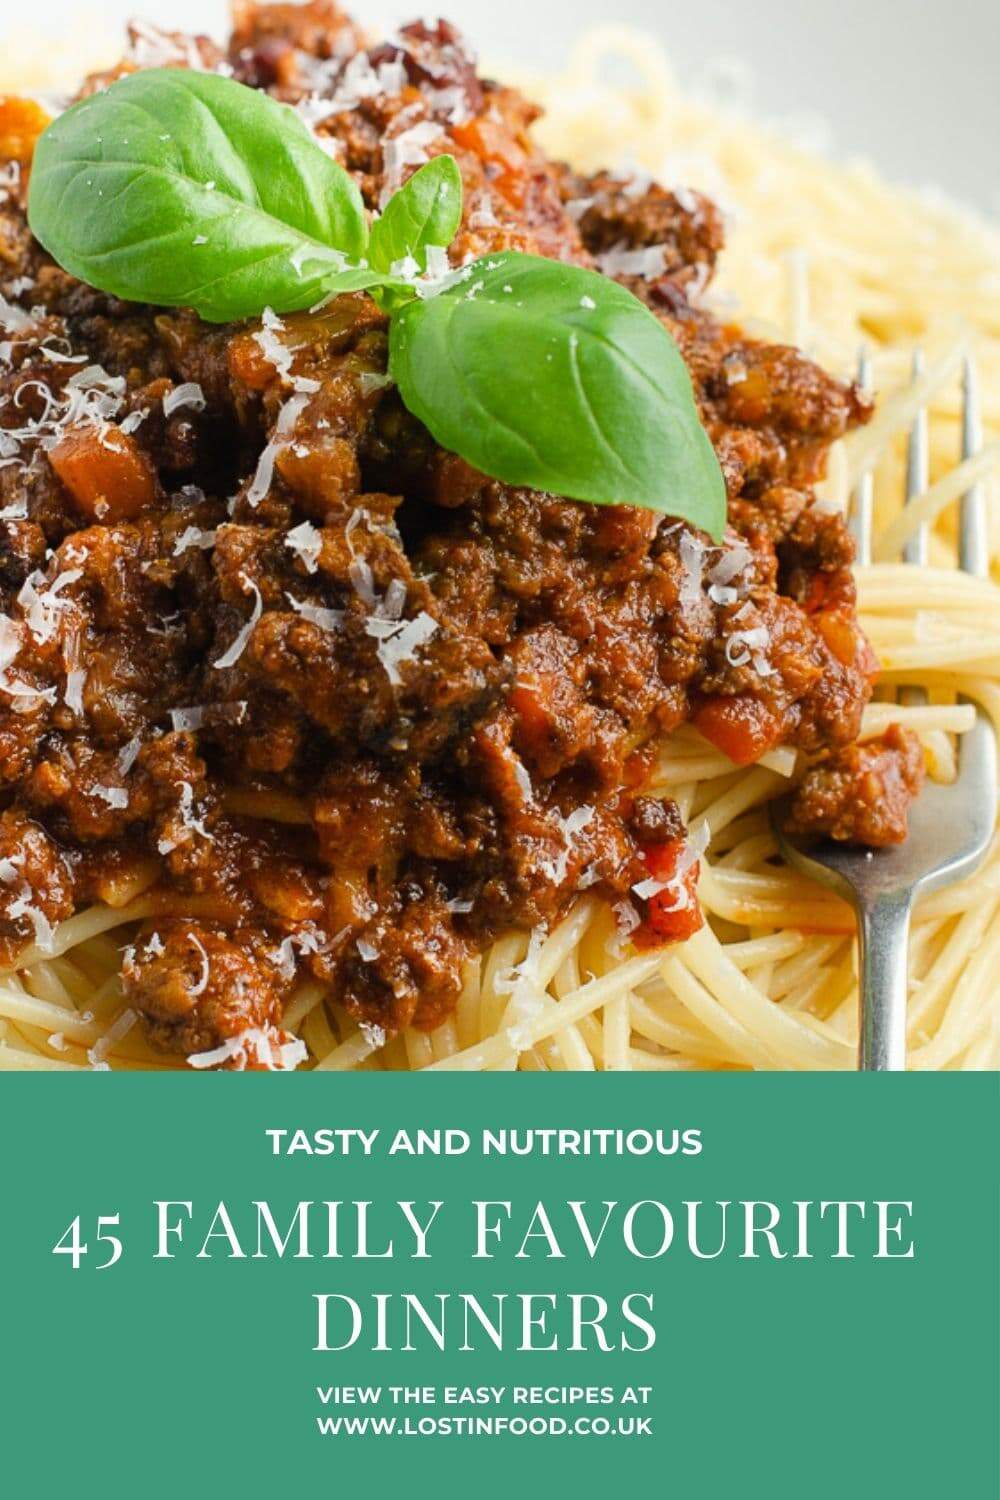 45 main dishes for feeding a family, whether week night dishes, quick for the kids, or lazy Sunday dinners. Something to refresh your weekly menu planning.